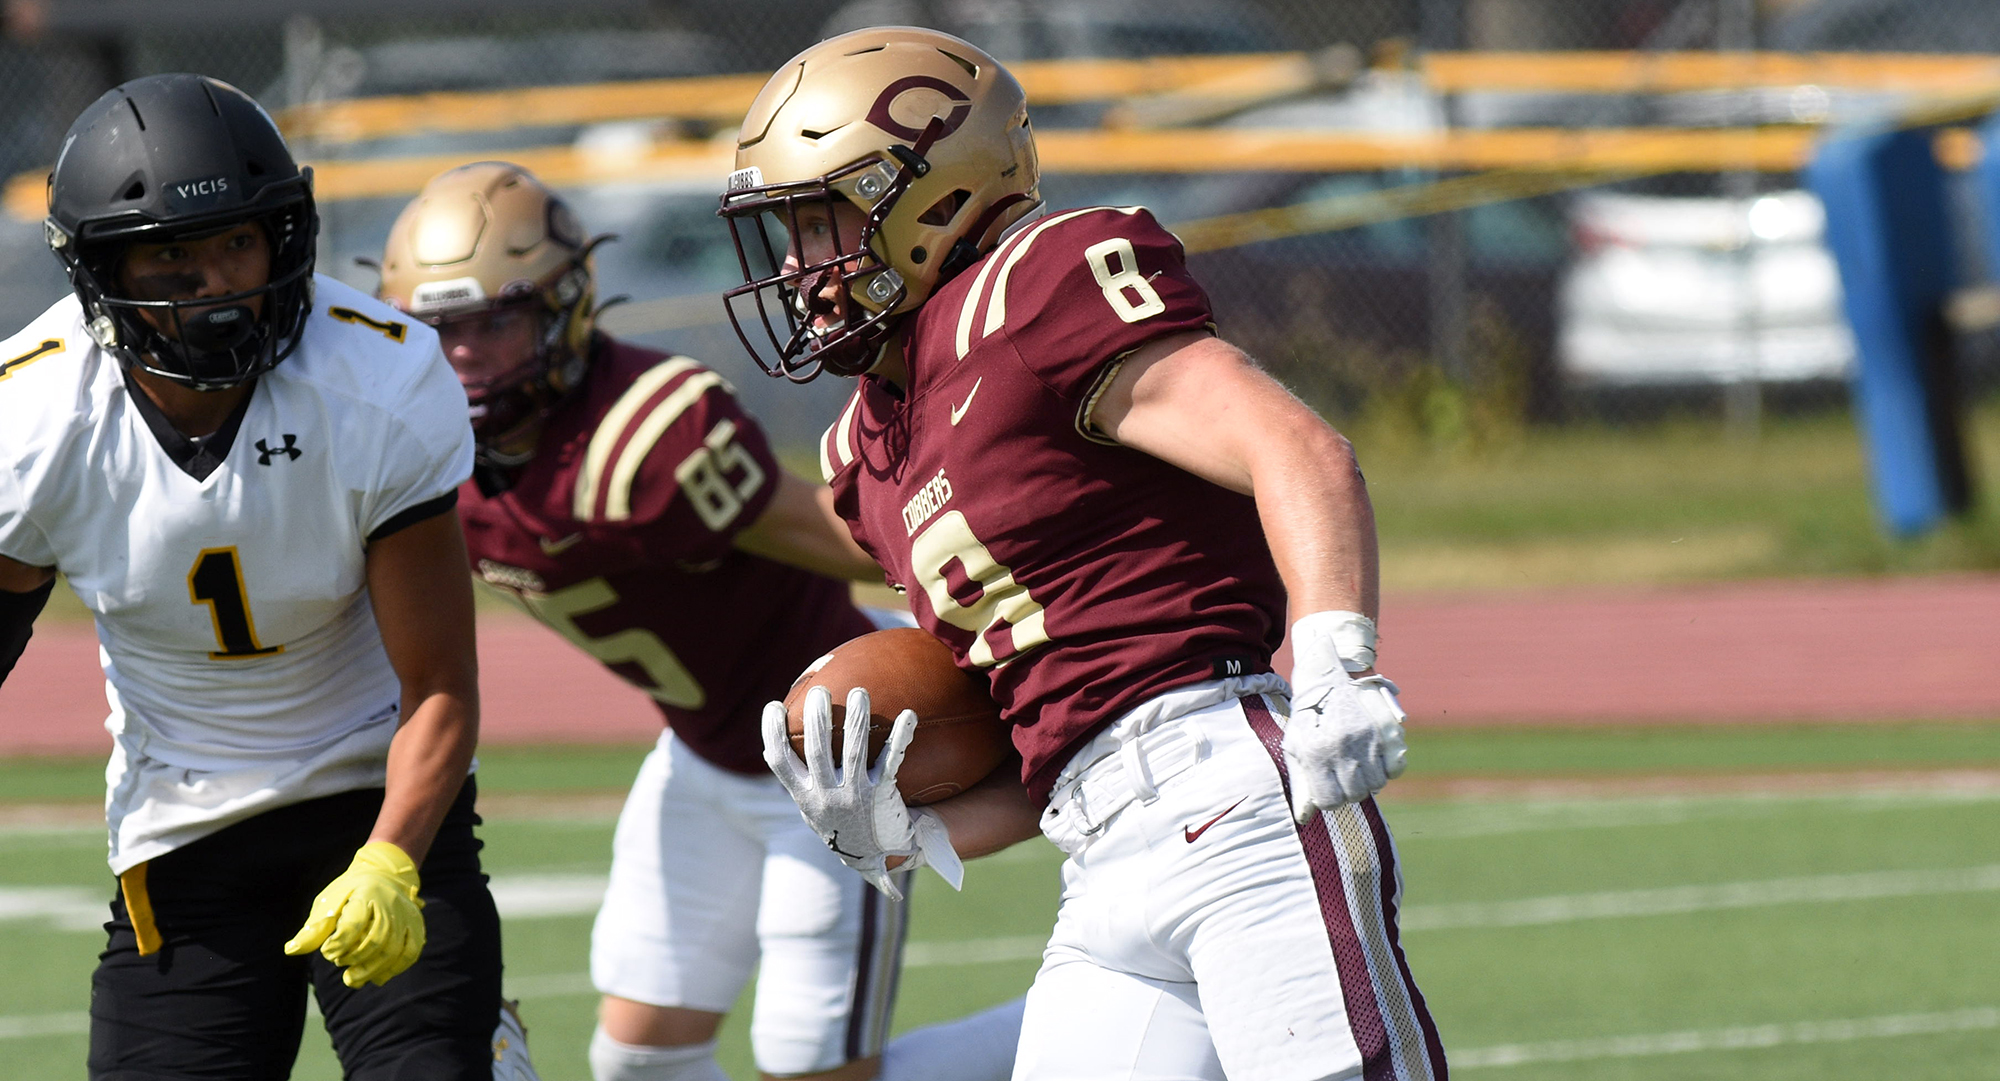 Owen Miller had a career game in the Cobbers' contest at St. John's. He had career-high numbers in receptions and receiving yards and scored twice.